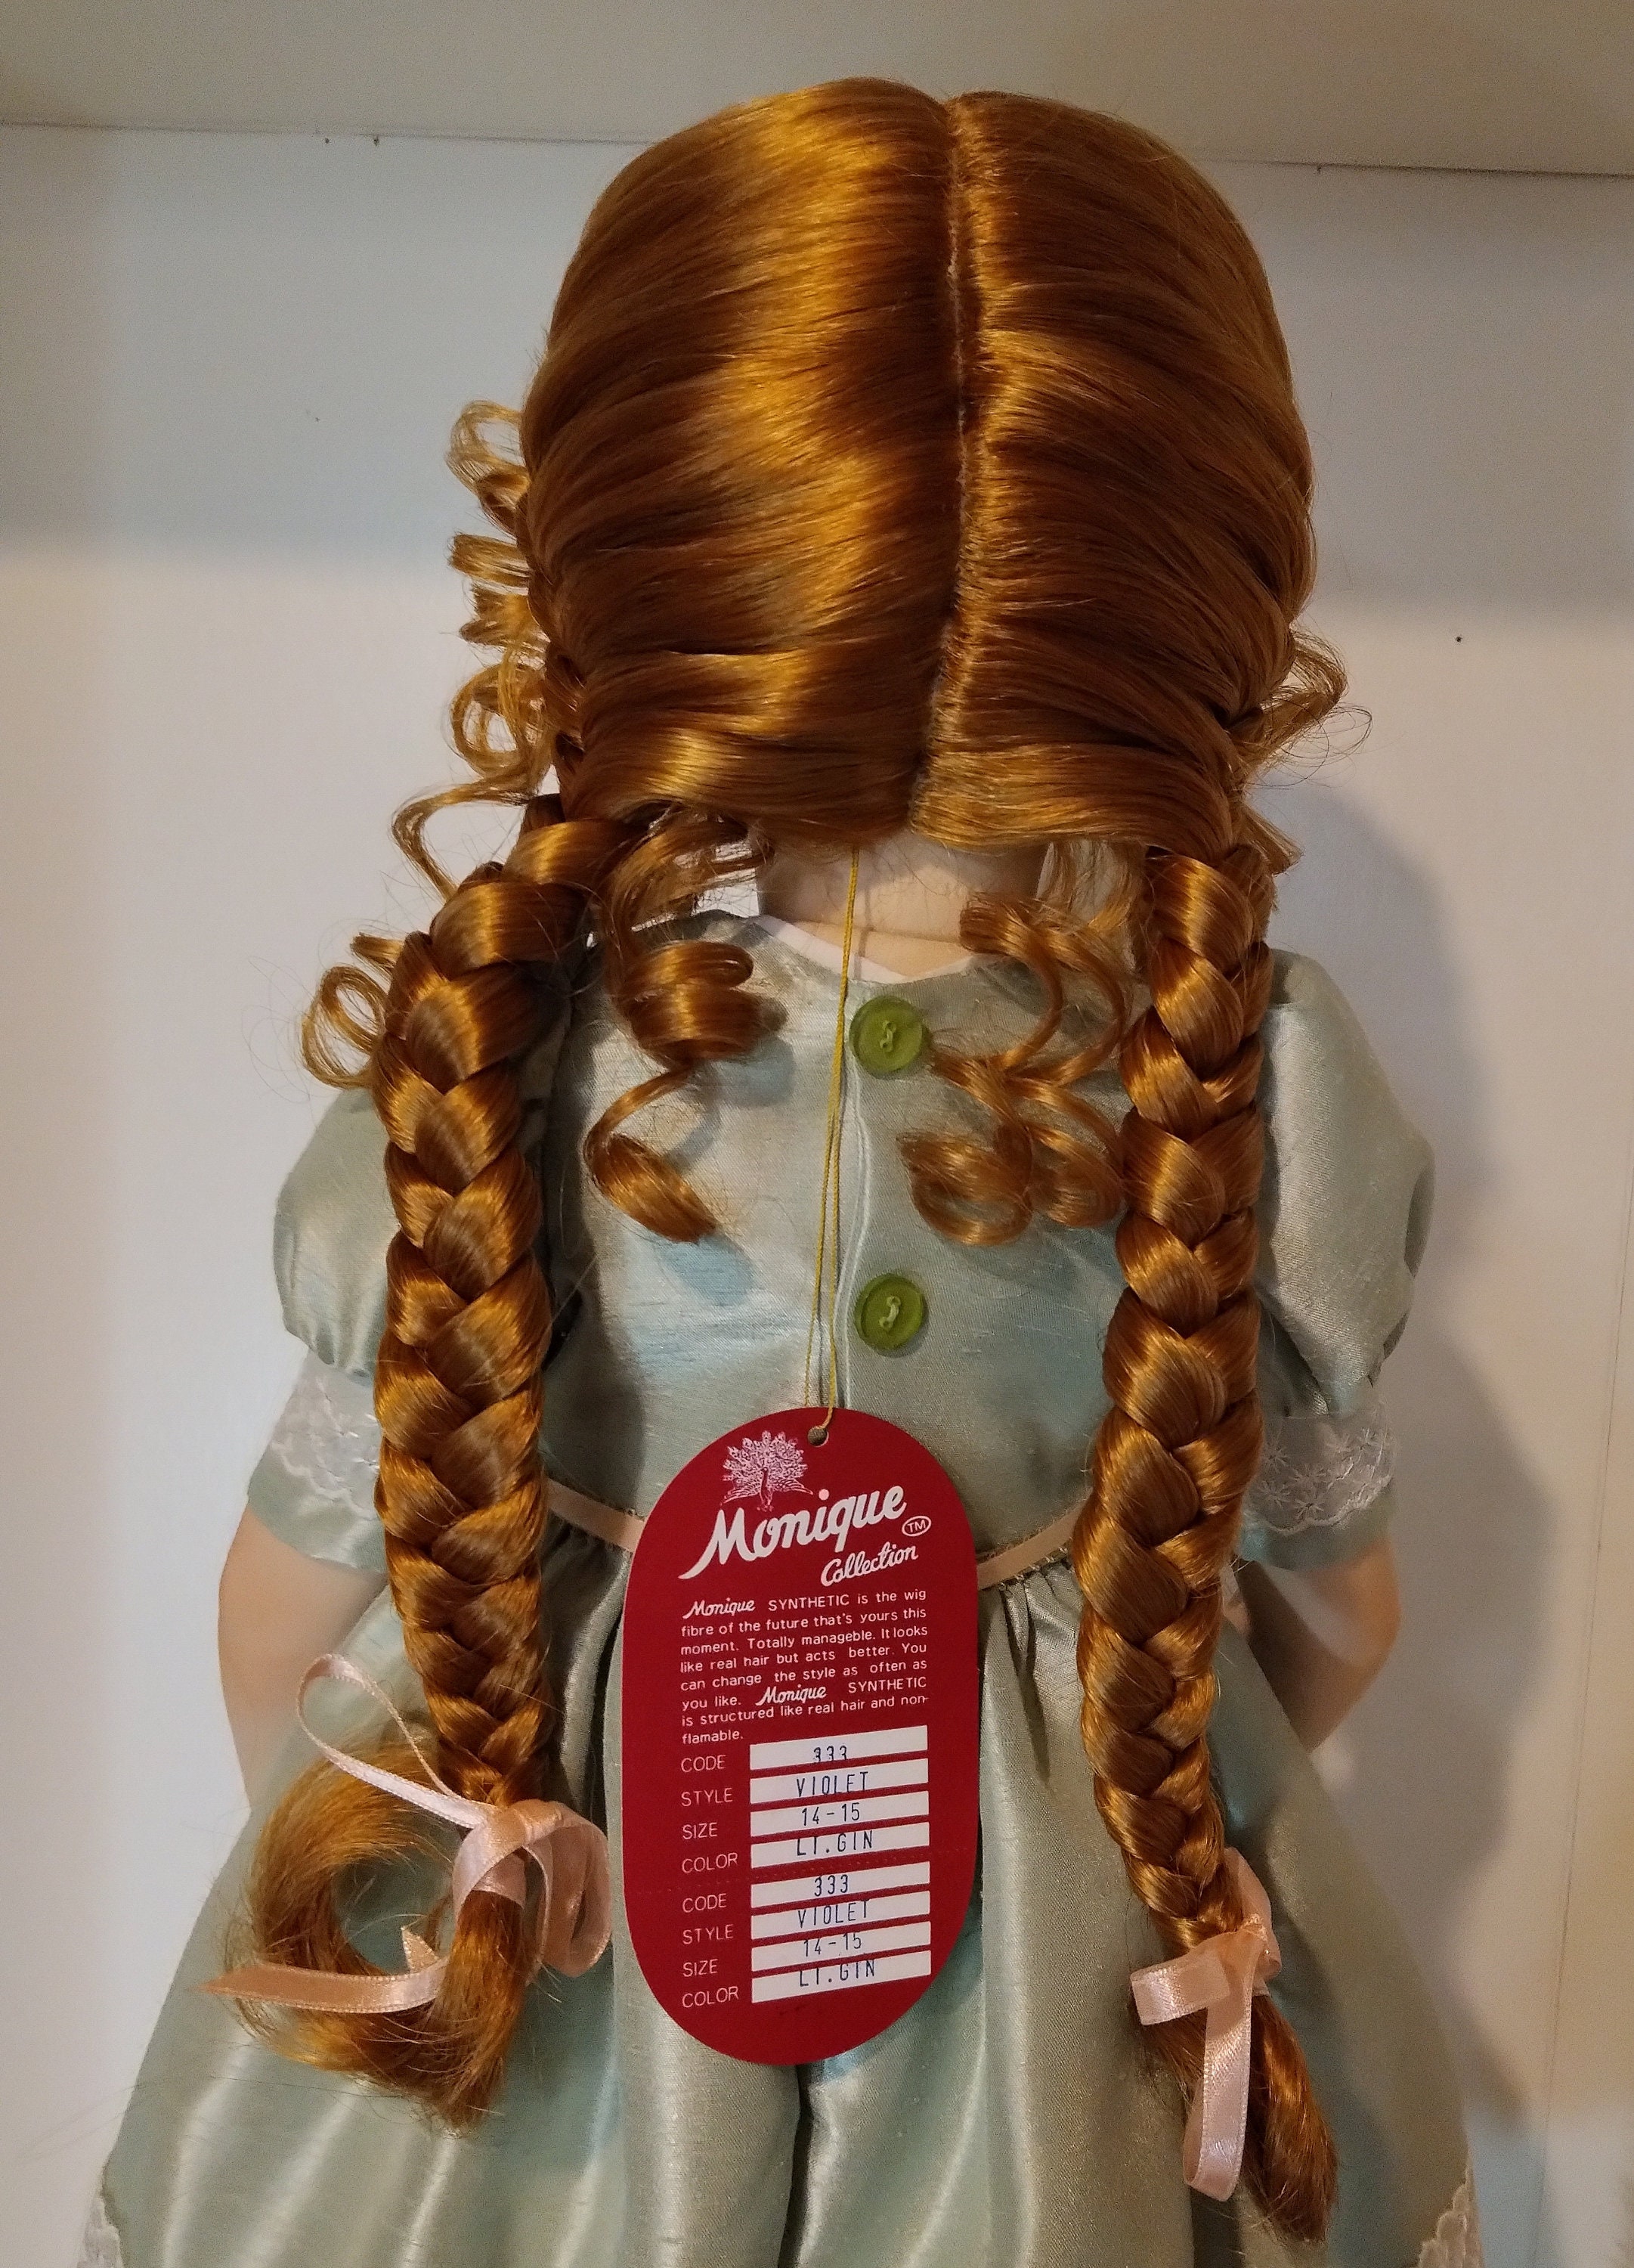 Red Long Wig For Sex Doll - Coeros